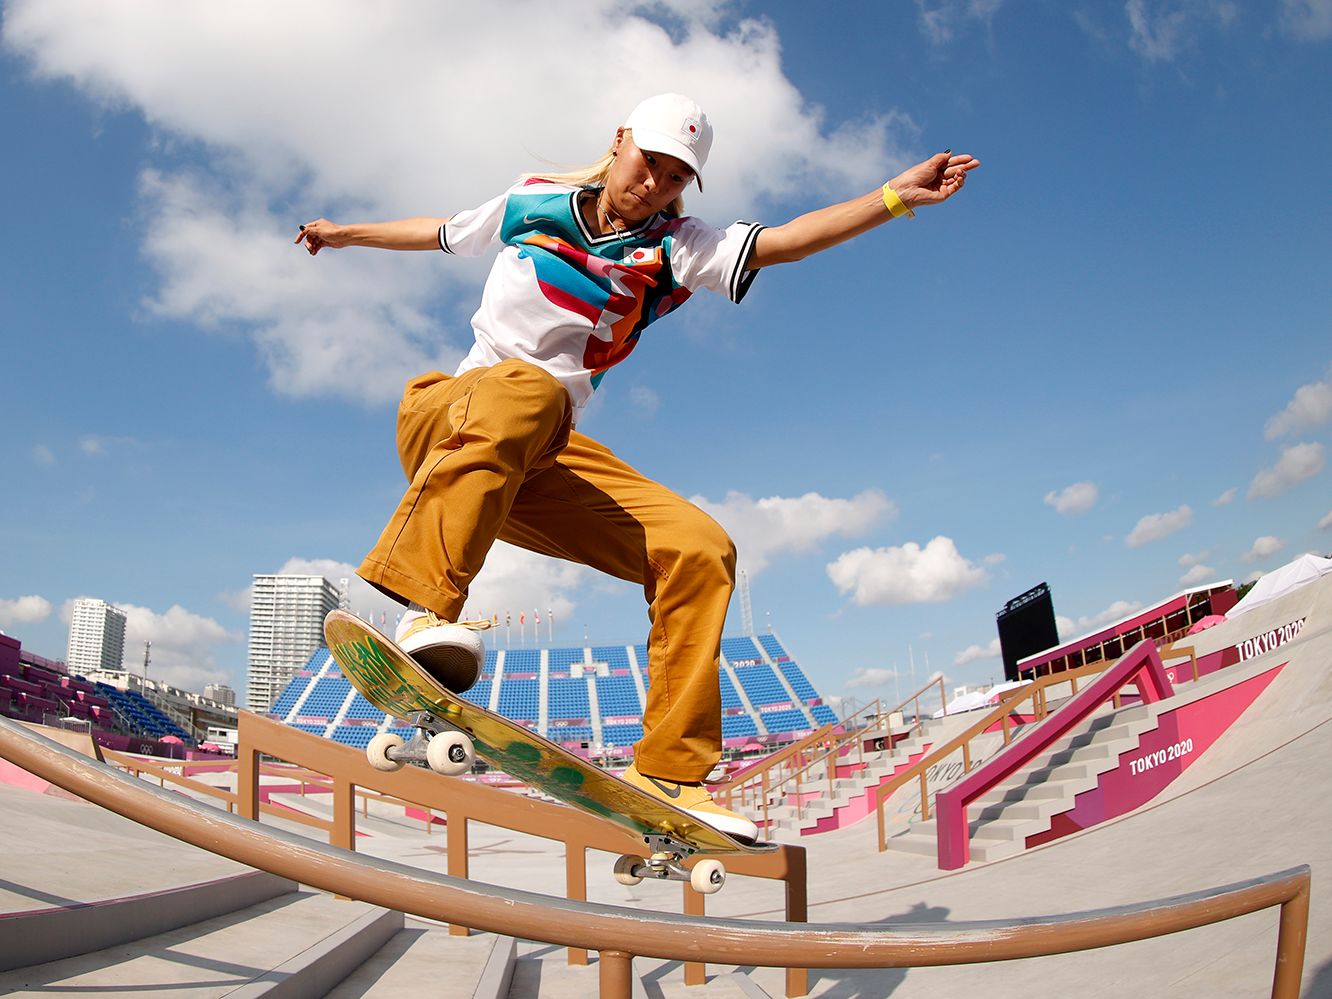 People in Japan thought skate culture dangerous. Now it's going mainstream | CNN